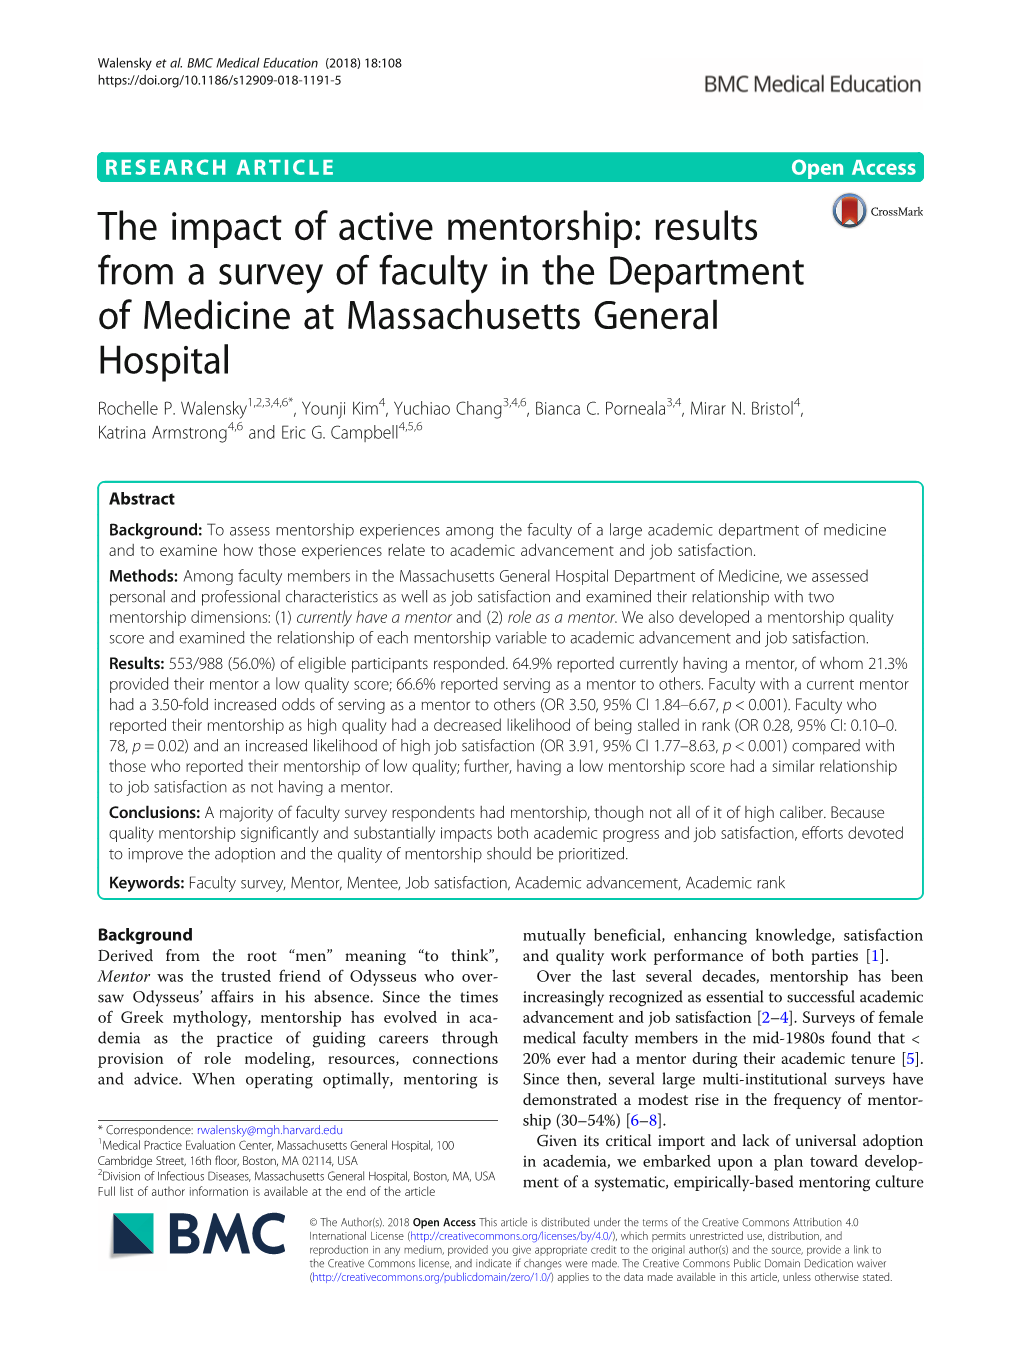 The Impact of Active Mentorship: Results from a Survey of Faculty in the Department of Medicine at Massachusetts General Hospital Rochelle P